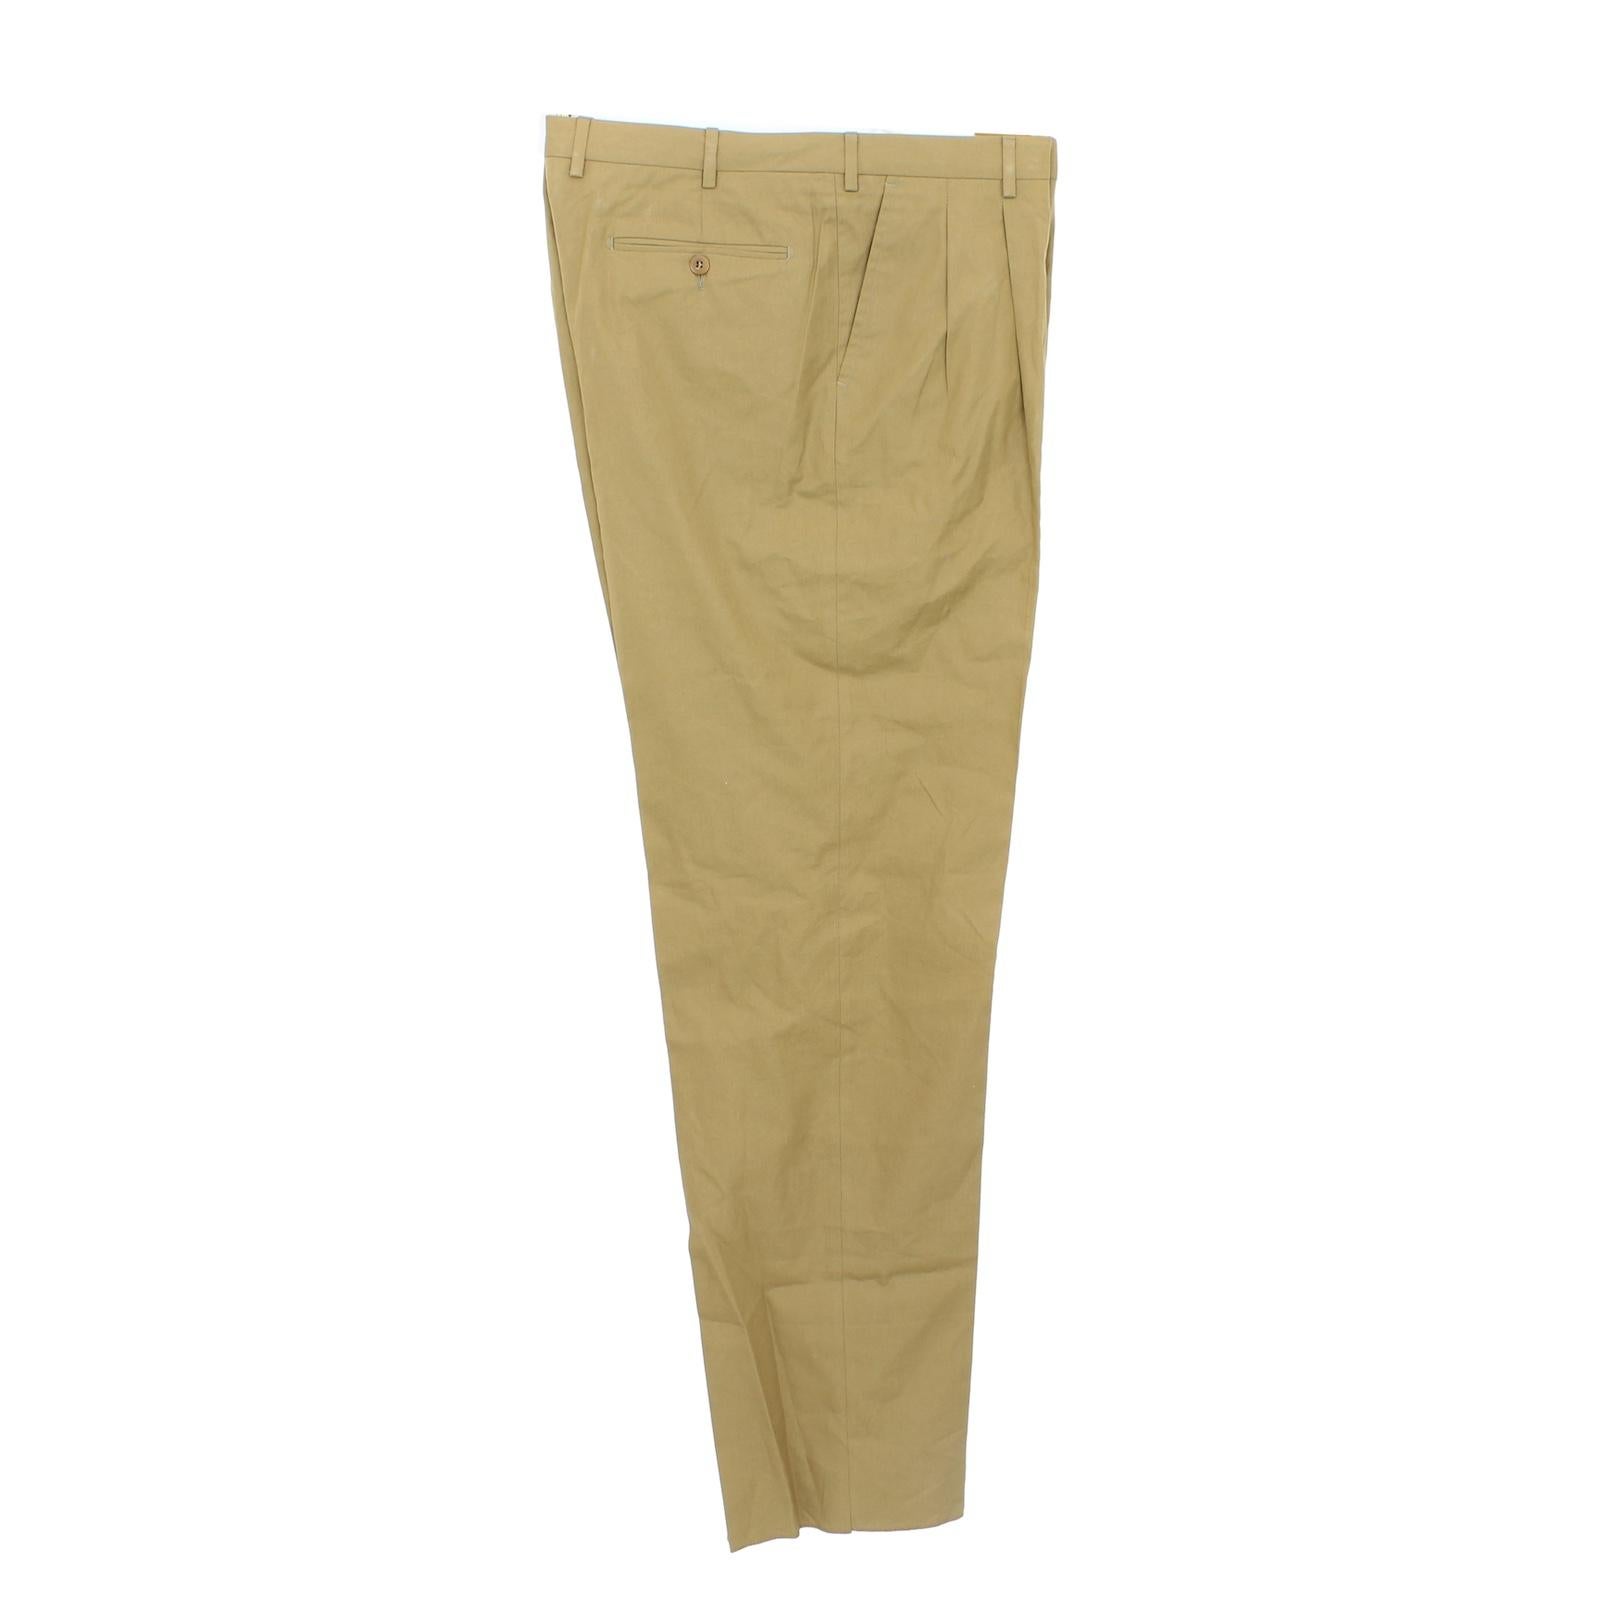 Burberry vintage 90s trousers. Classic model, beige colour, 100% cotton fabric. Made in Italy. New from warehouse stock.

Size: 56 It 46 Us 46 Uk

Waist: 48 cm
Length: 122 cm
Hem: 21 cm
Inseam length: 95 cm